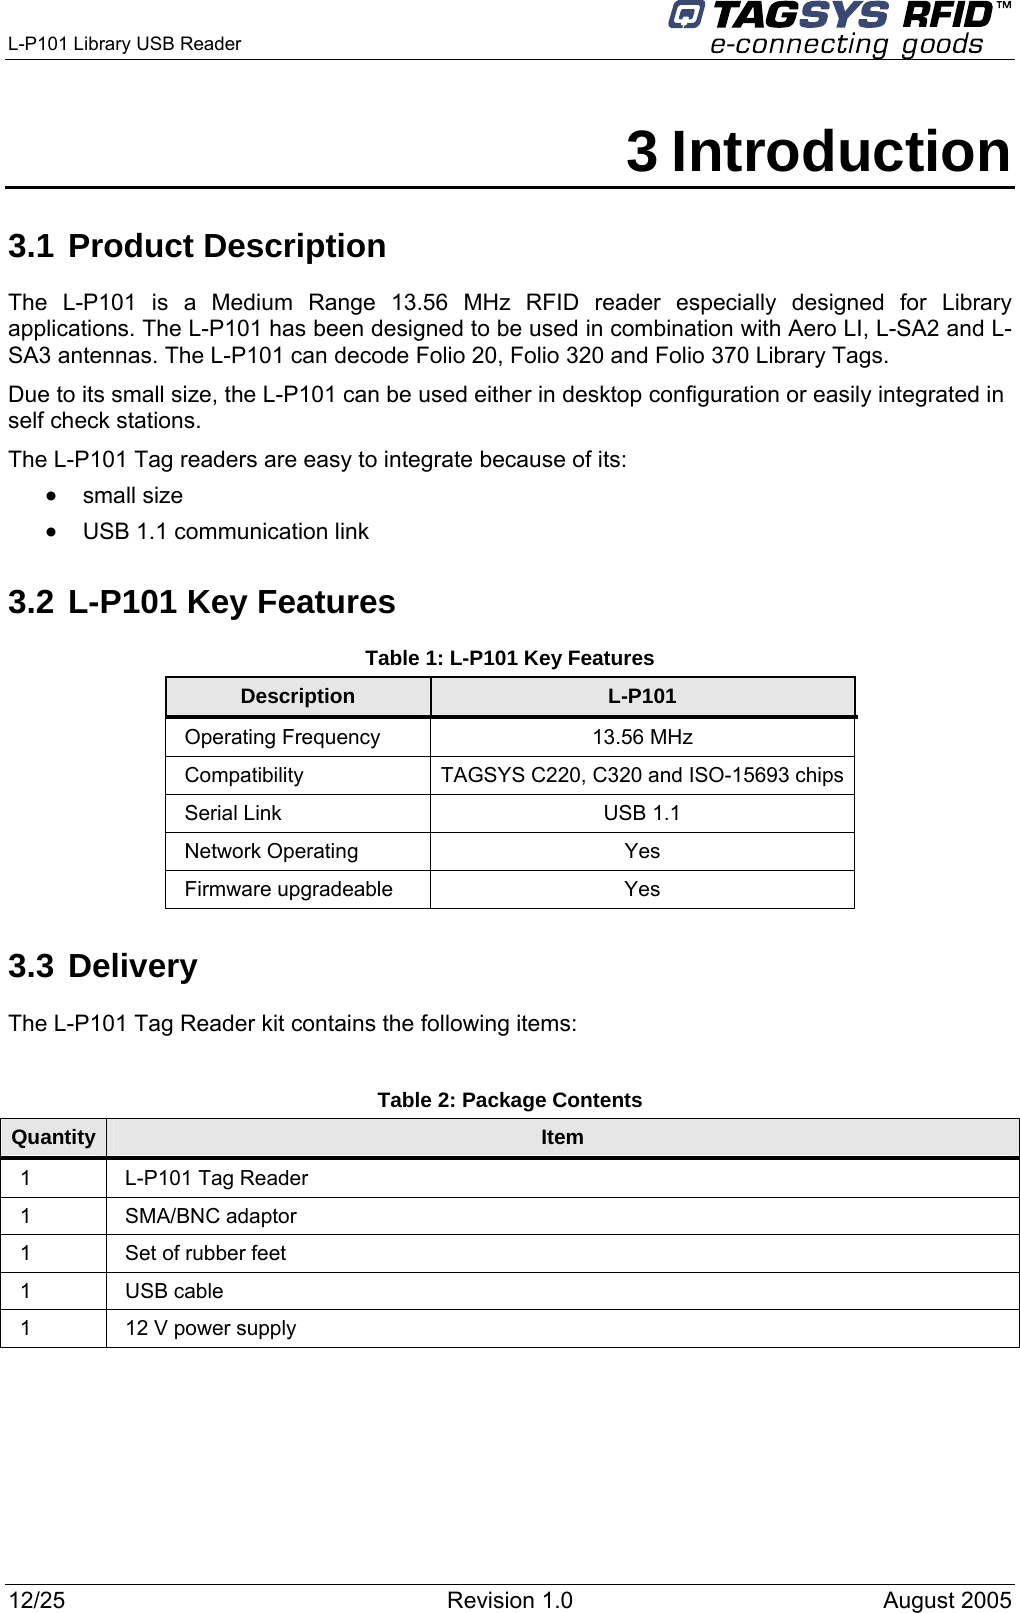  L-P101 Library USB Reader      3 Introduction 3.1 Product Description The L-P101 is a Medium Range 13.56 MHz RFID reader especially designed for Library applications. The L-P101 has been designed to be used in combination with Aero LI, L-SA2 and L-SA3 antennas. The L-P101 can decode Folio 20, Folio 320 and Folio 370 Library Tags. Due to its small size, the L-P101 can be used either in desktop configuration or easily integrated in self check stations. The L-P101 Tag readers are easy to integrate because of its: •  small size •  USB 1.1 communication link 3.2 L-P101 Key Features Table 1: L-P101 Key Features Description  L-P101 Operating Frequency  13.56 MHz Compatibility TAGSYS C220, C320 and ISO-15693 chips Serial Link  USB 1.1 Network Operating  Yes Firmware upgradeable  Yes 3.3 Delivery The L-P101 Tag Reader kit contains the following items:  Table 2: Package Contents Quantity  Item 1 L-P101 Tag Reader 1 SMA/BNC adaptor 1  Set of rubber feet 1 USB cable 1  12 V power supply 12/25  Revision 1.0  August 2005   